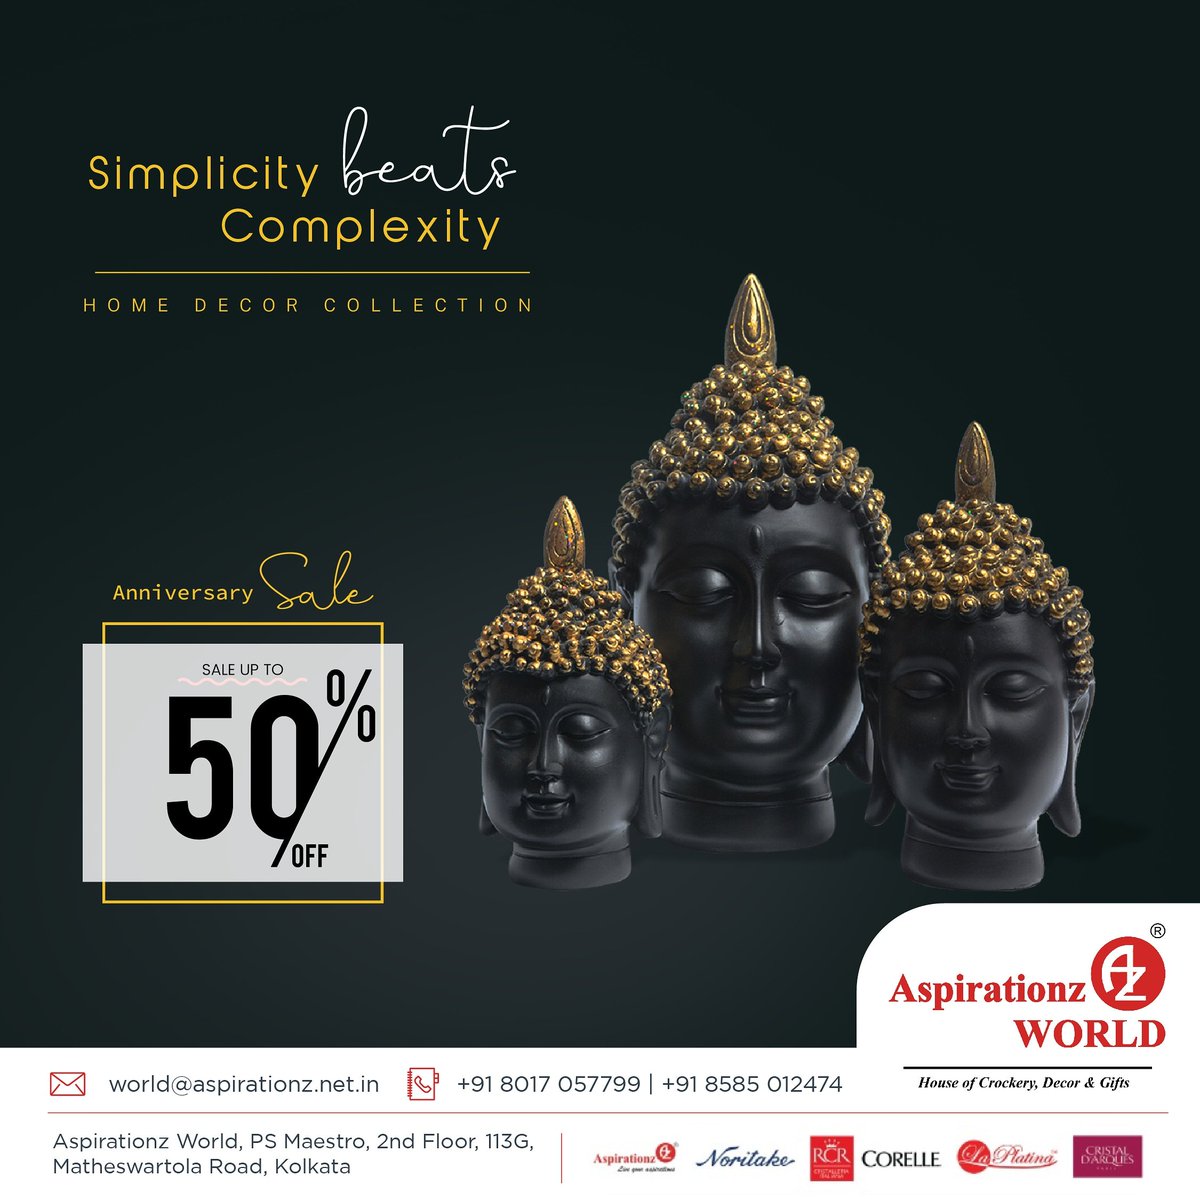 A Sale you can't resist!
Aspirationz World brings anniversary sale-Upto 50 percent off! 

A store where simplicity means complexity- exclusive Home Decor Collection.

#aspirationzworld #crockeryunit #crockeryunitdesign #crockeryindia #dinewares #dineware #3rdanniversarysale